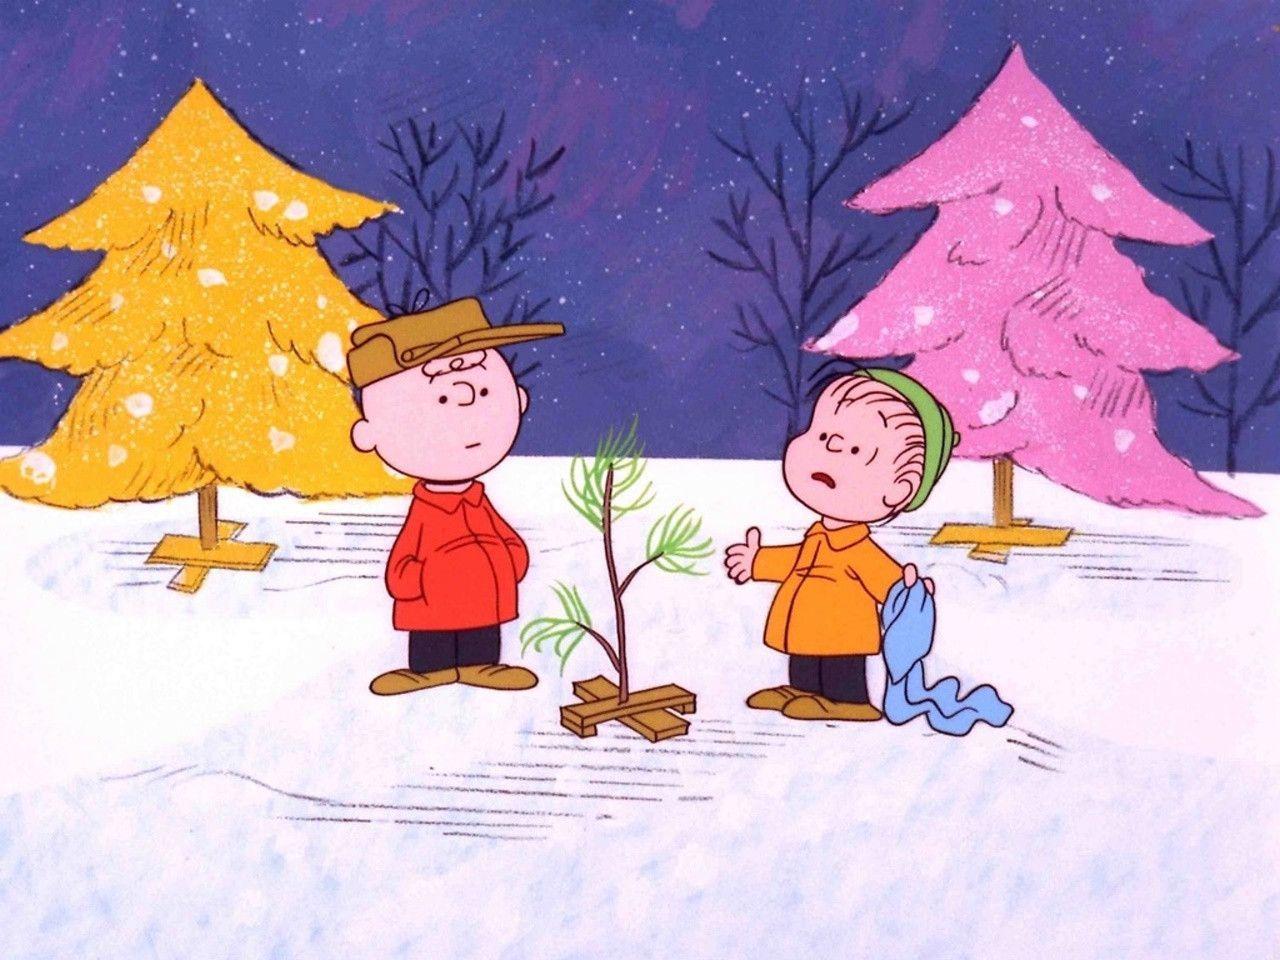 Charlie Brown Christmas Wallpaper. Home Decoration Ideas